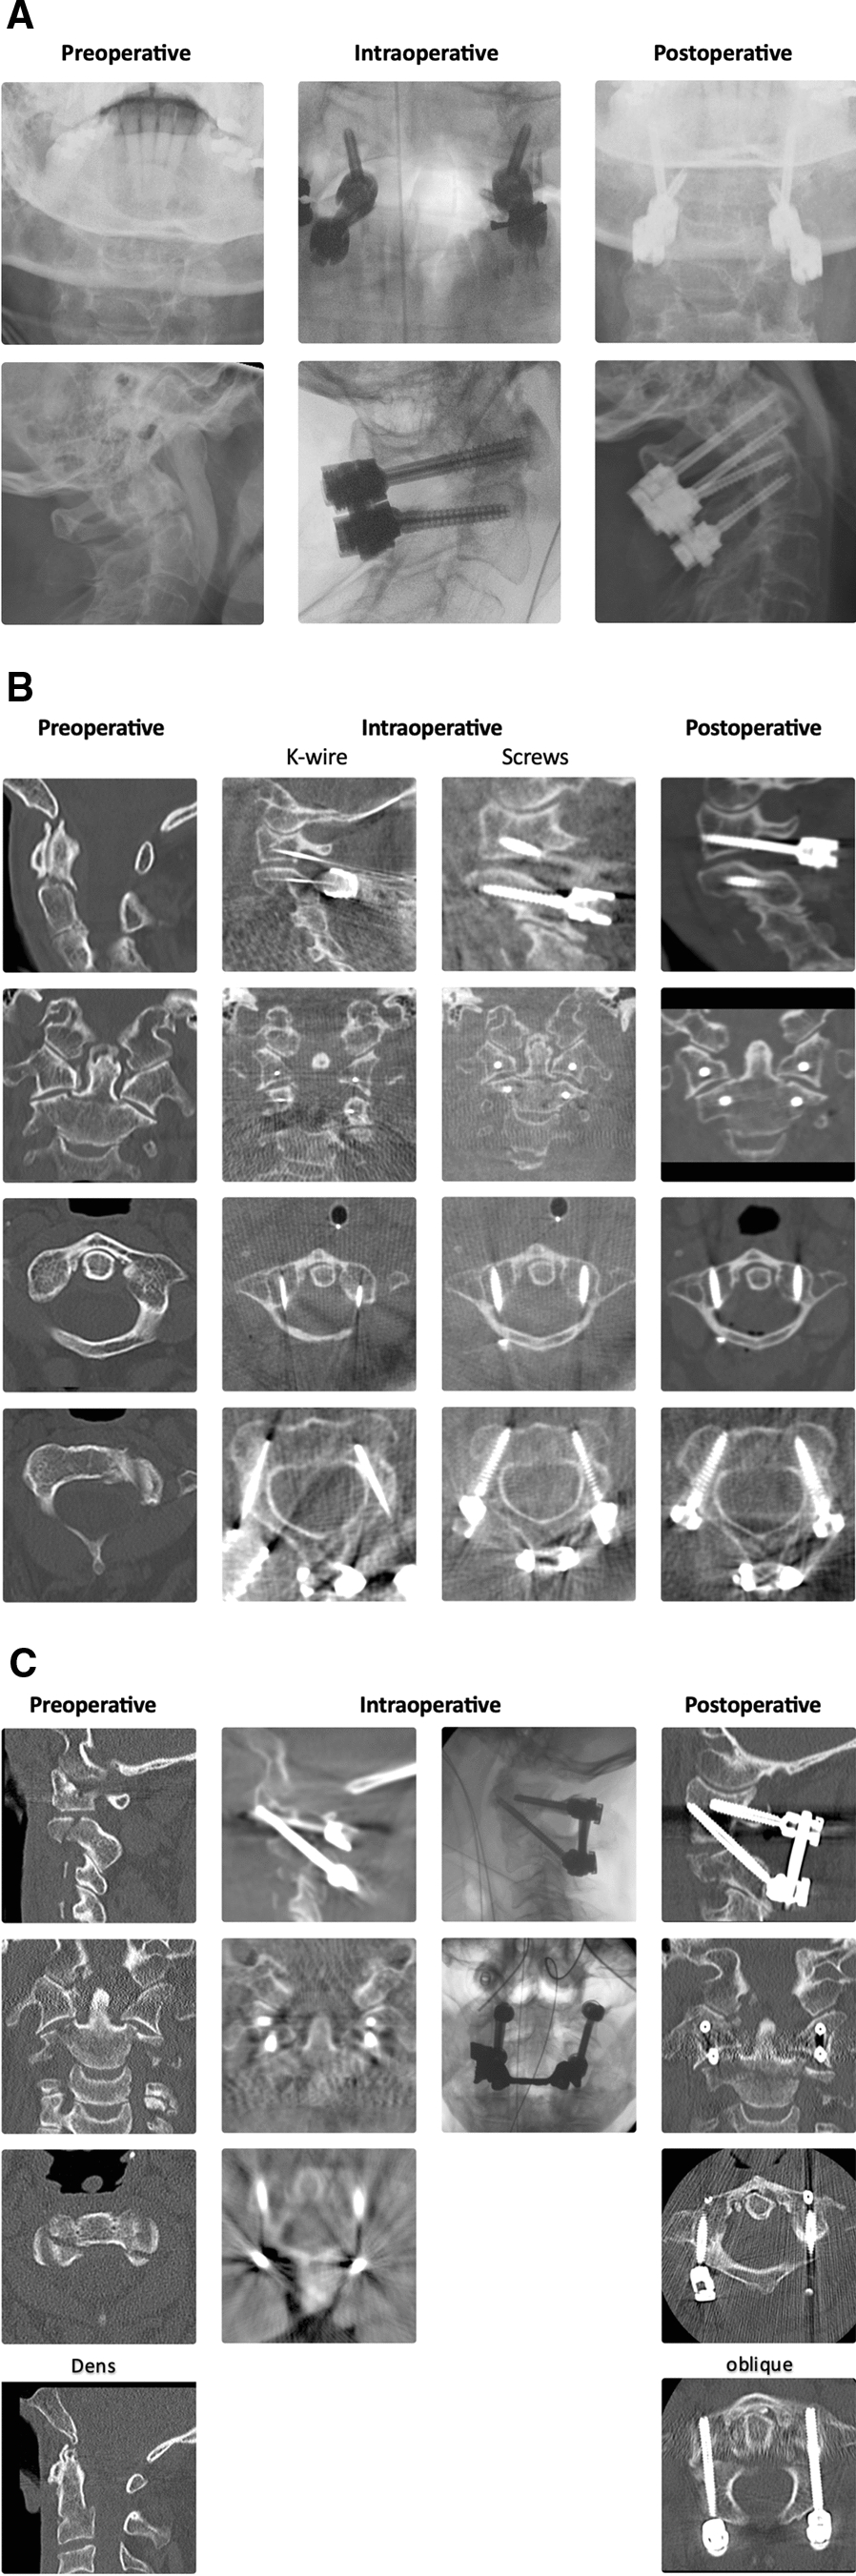 Comparison of iCT-based navigation and fluoroscopic-guidance for atlantoaxial screw placement in 78 patients with traumatic cervical spine injuries